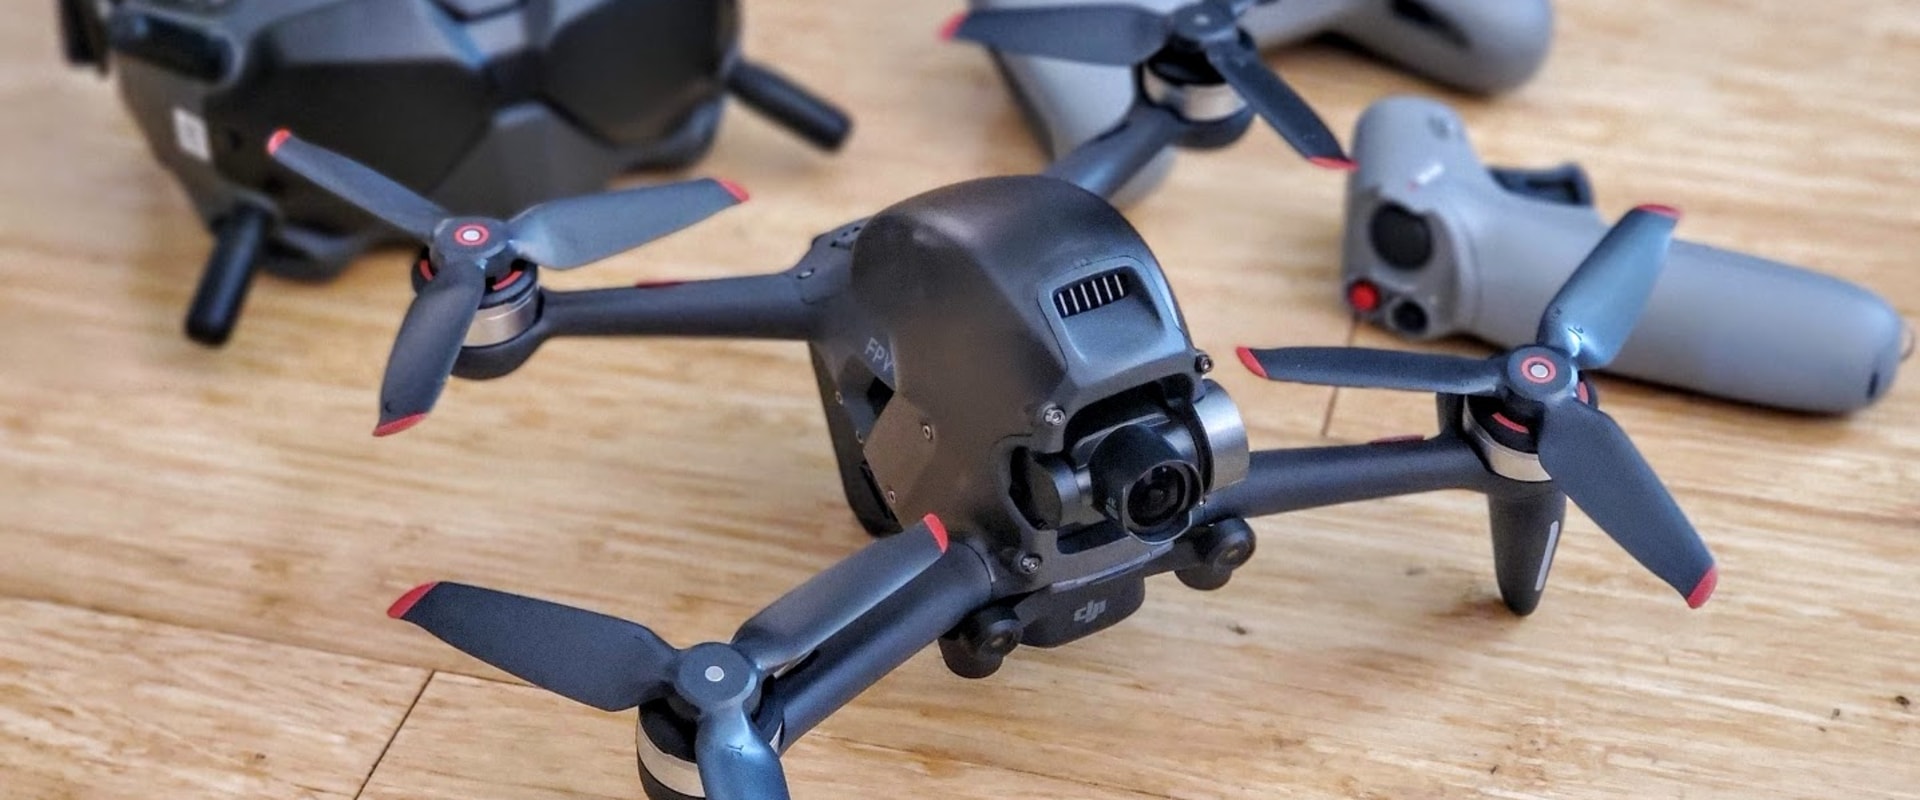 Everything You Need to Know About the Price Range for Racing Drones